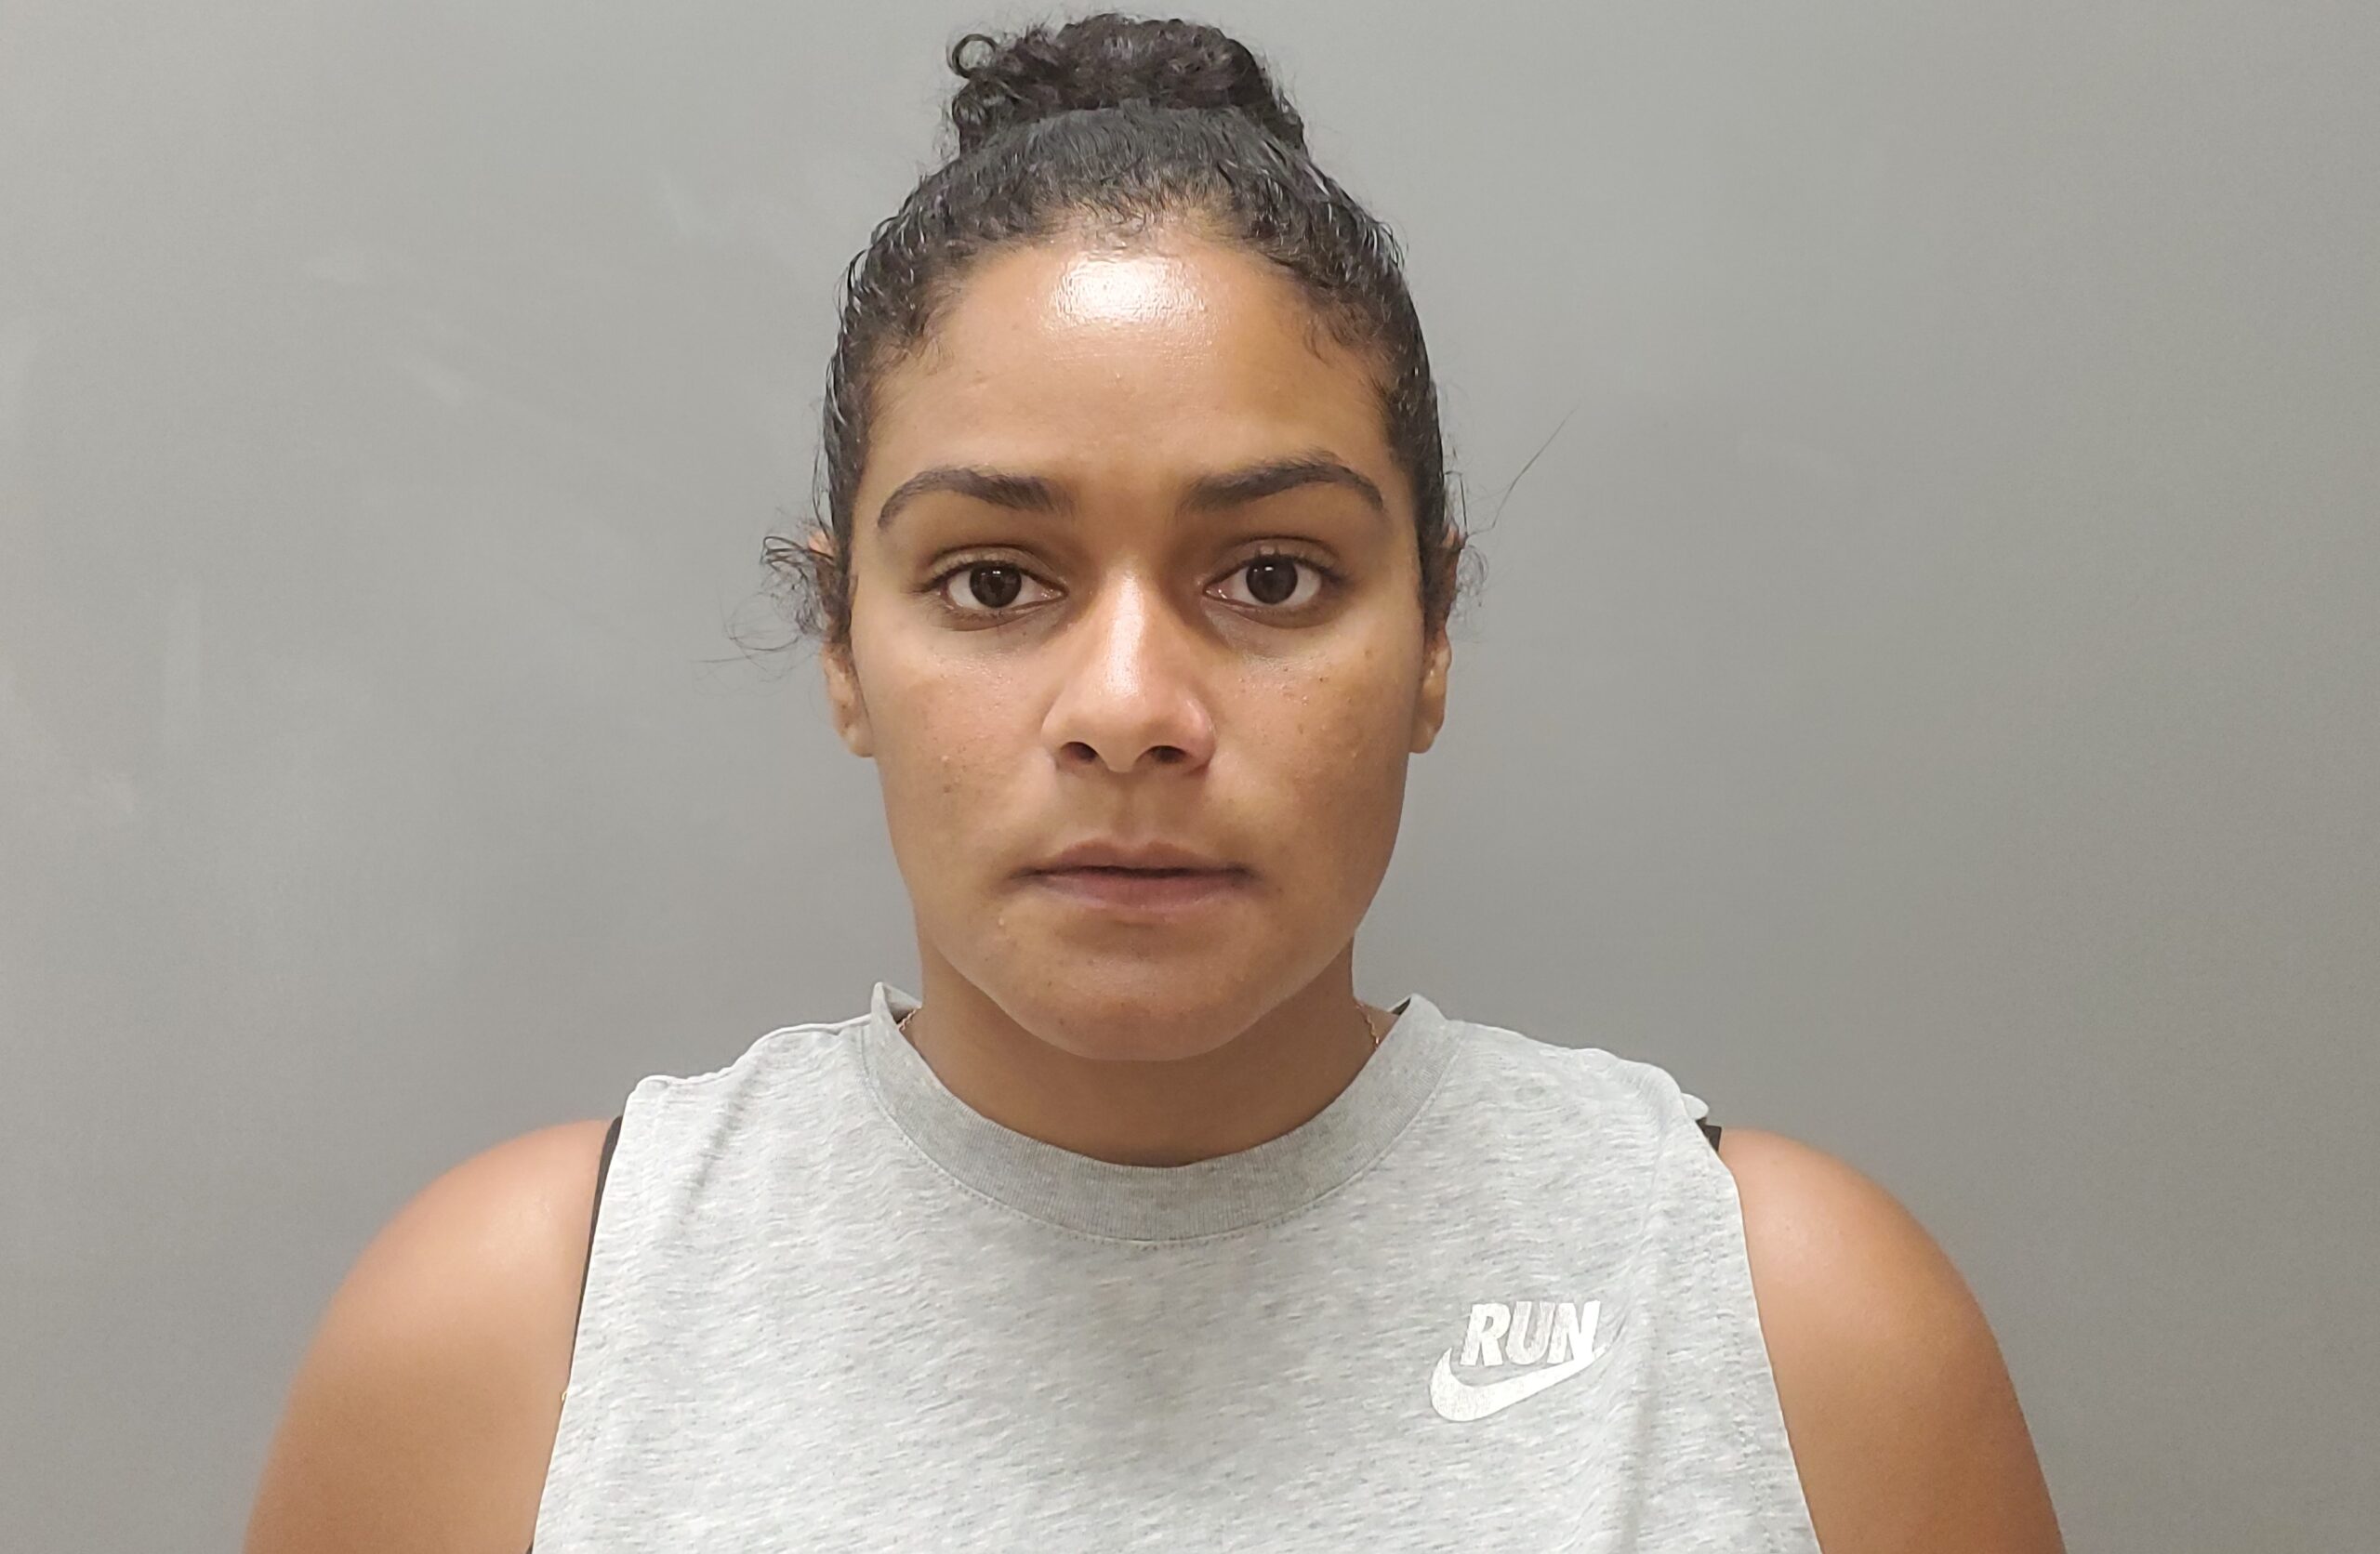 Feds Detain New York Woman On Illinois Fugitive Charges At St. Thomas Airport